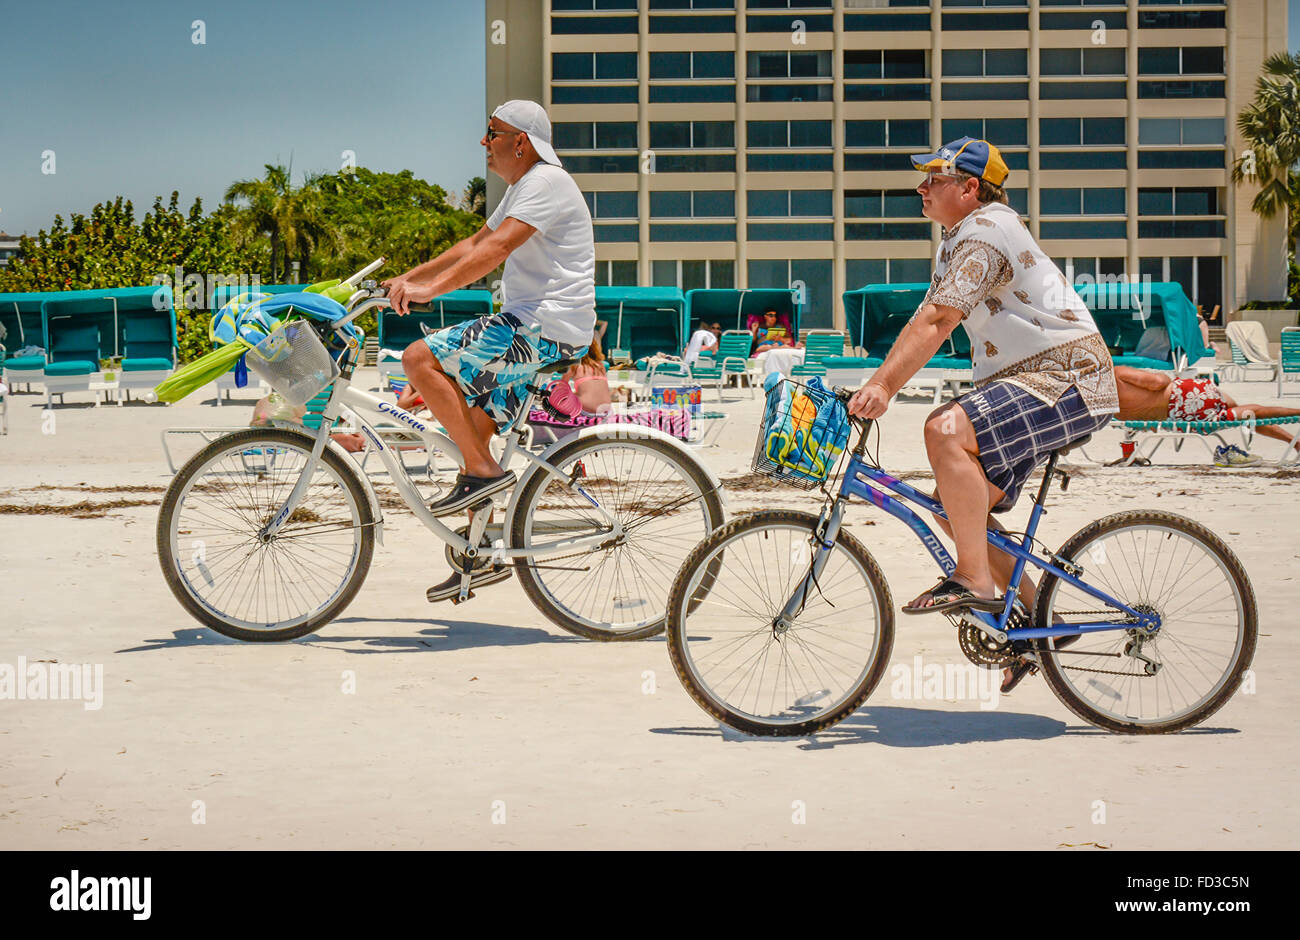 Two men loaded with beach gear bike along the shoreline on their cruiser bicycles in front of sunbathers and condos in Florida Stock Photo